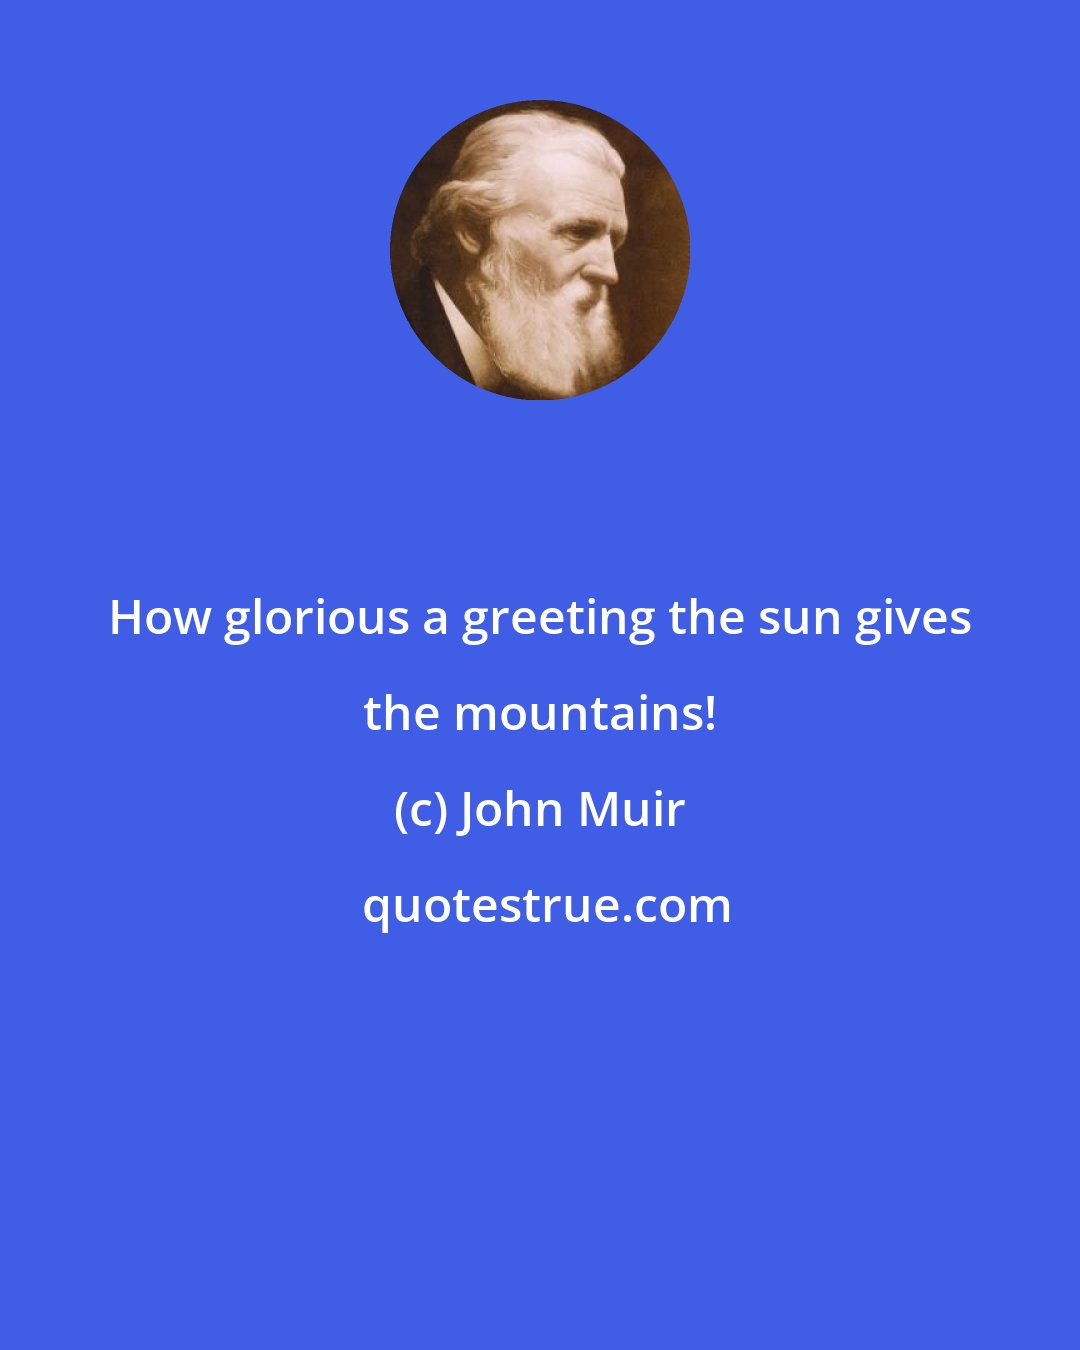 John Muir: How glorious a greeting the sun gives the mountains!